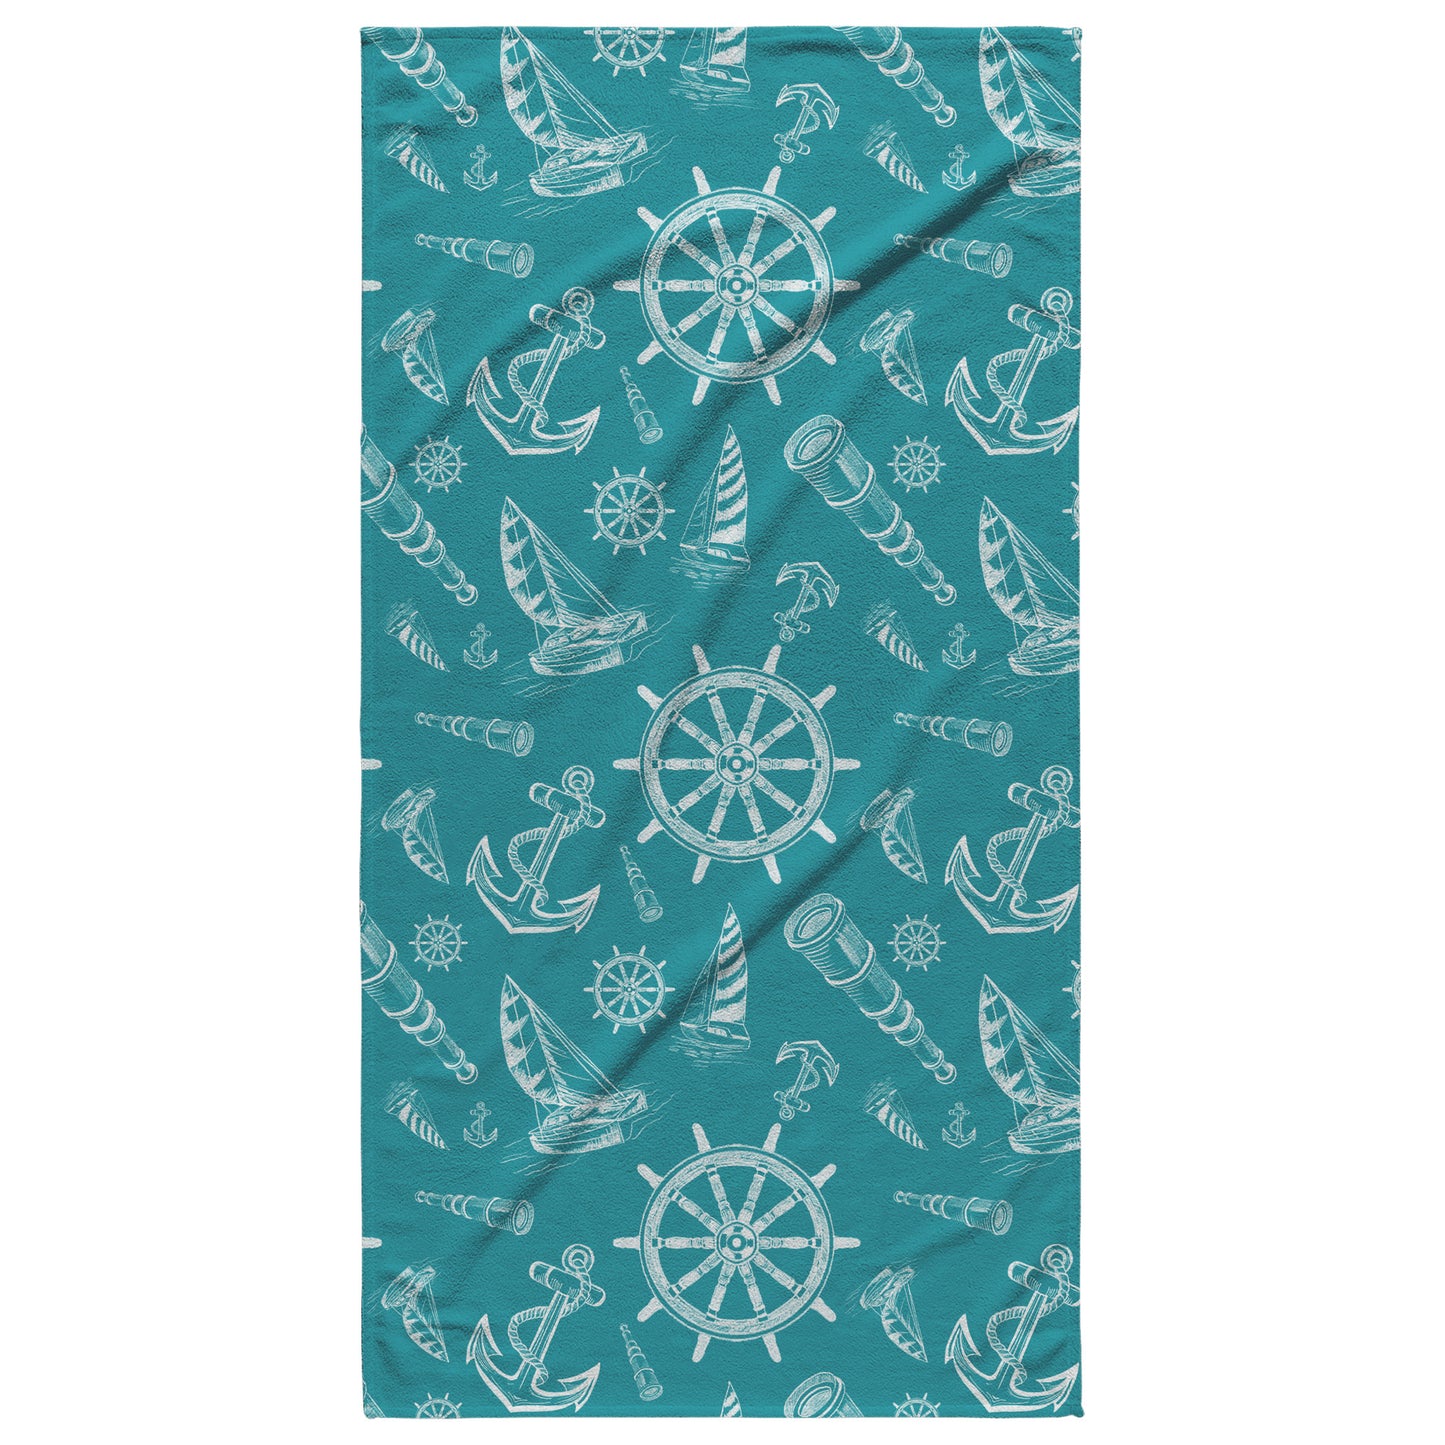 Nautical Sketches on Teal Background, Beach Towel